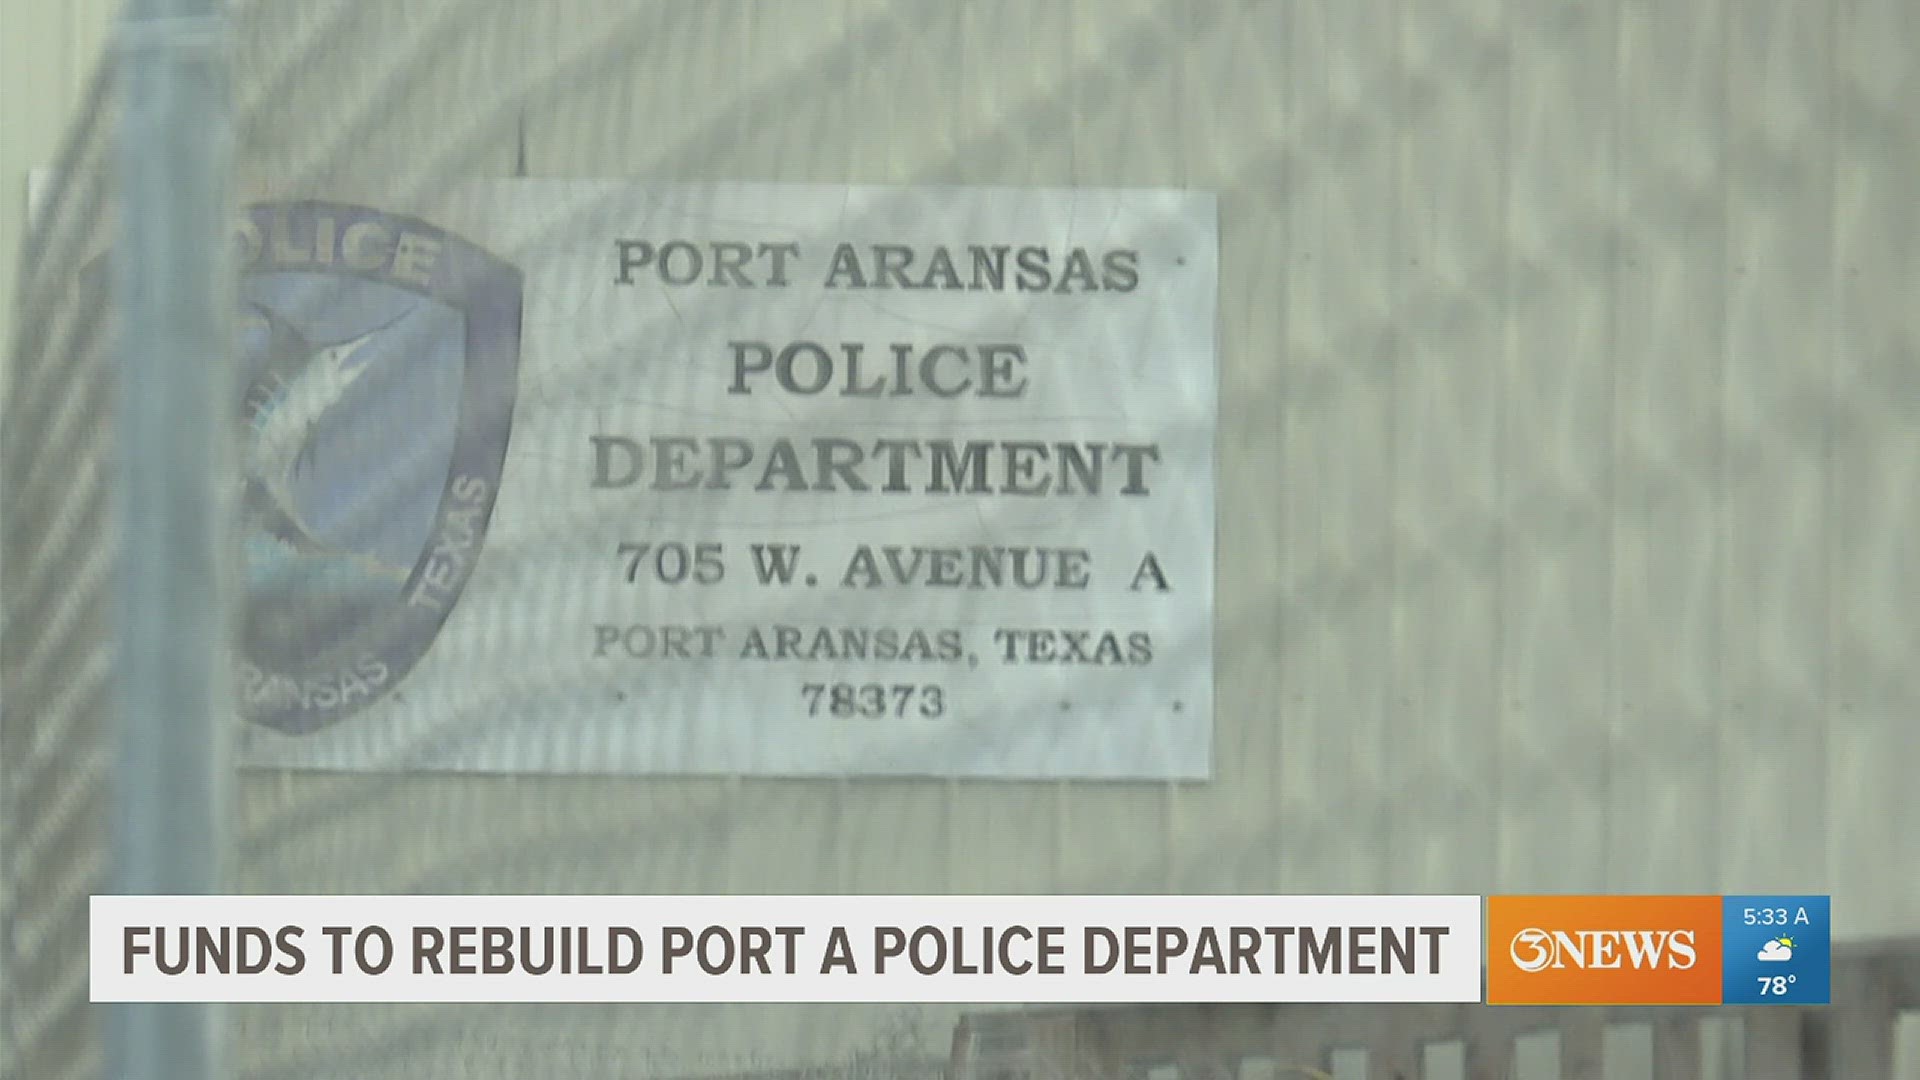 An $11 million investment will allow for a new public safety center in Port Aransas.